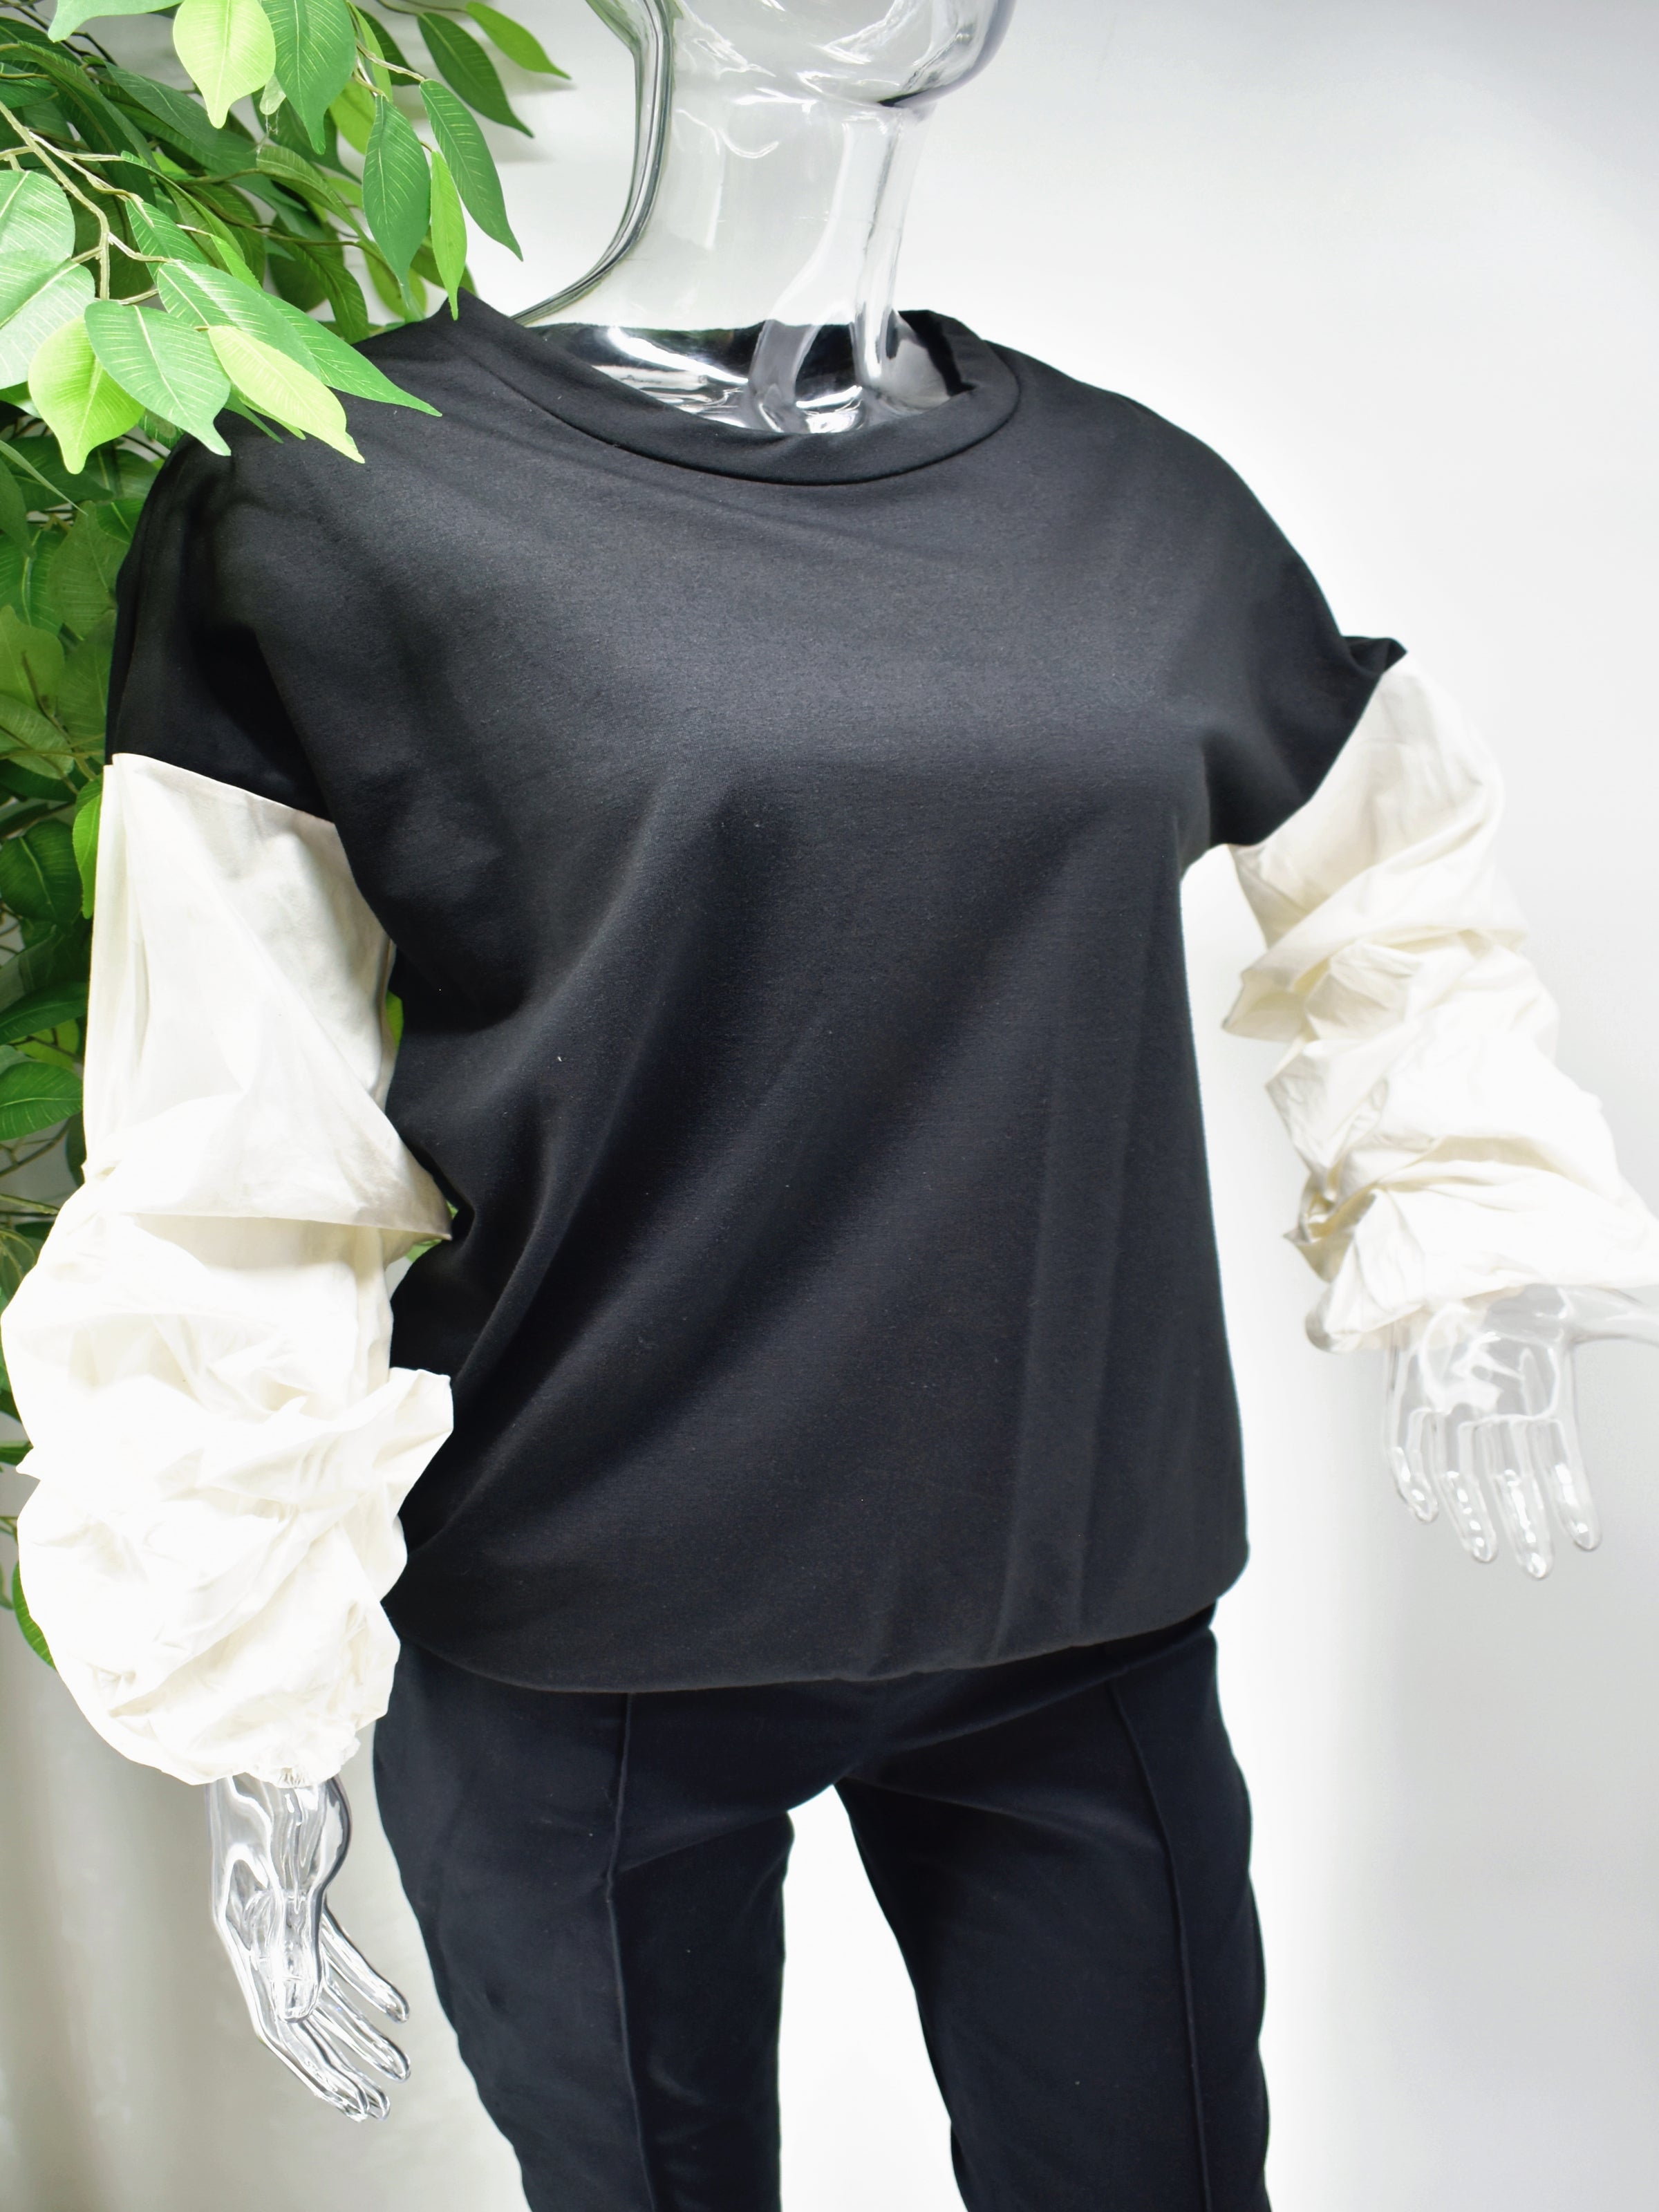 Let's Reinvent the sweater with our Bianey Black sweater top.  Our Bianey top is a black sweater top with a white puffed rouged sleeve.